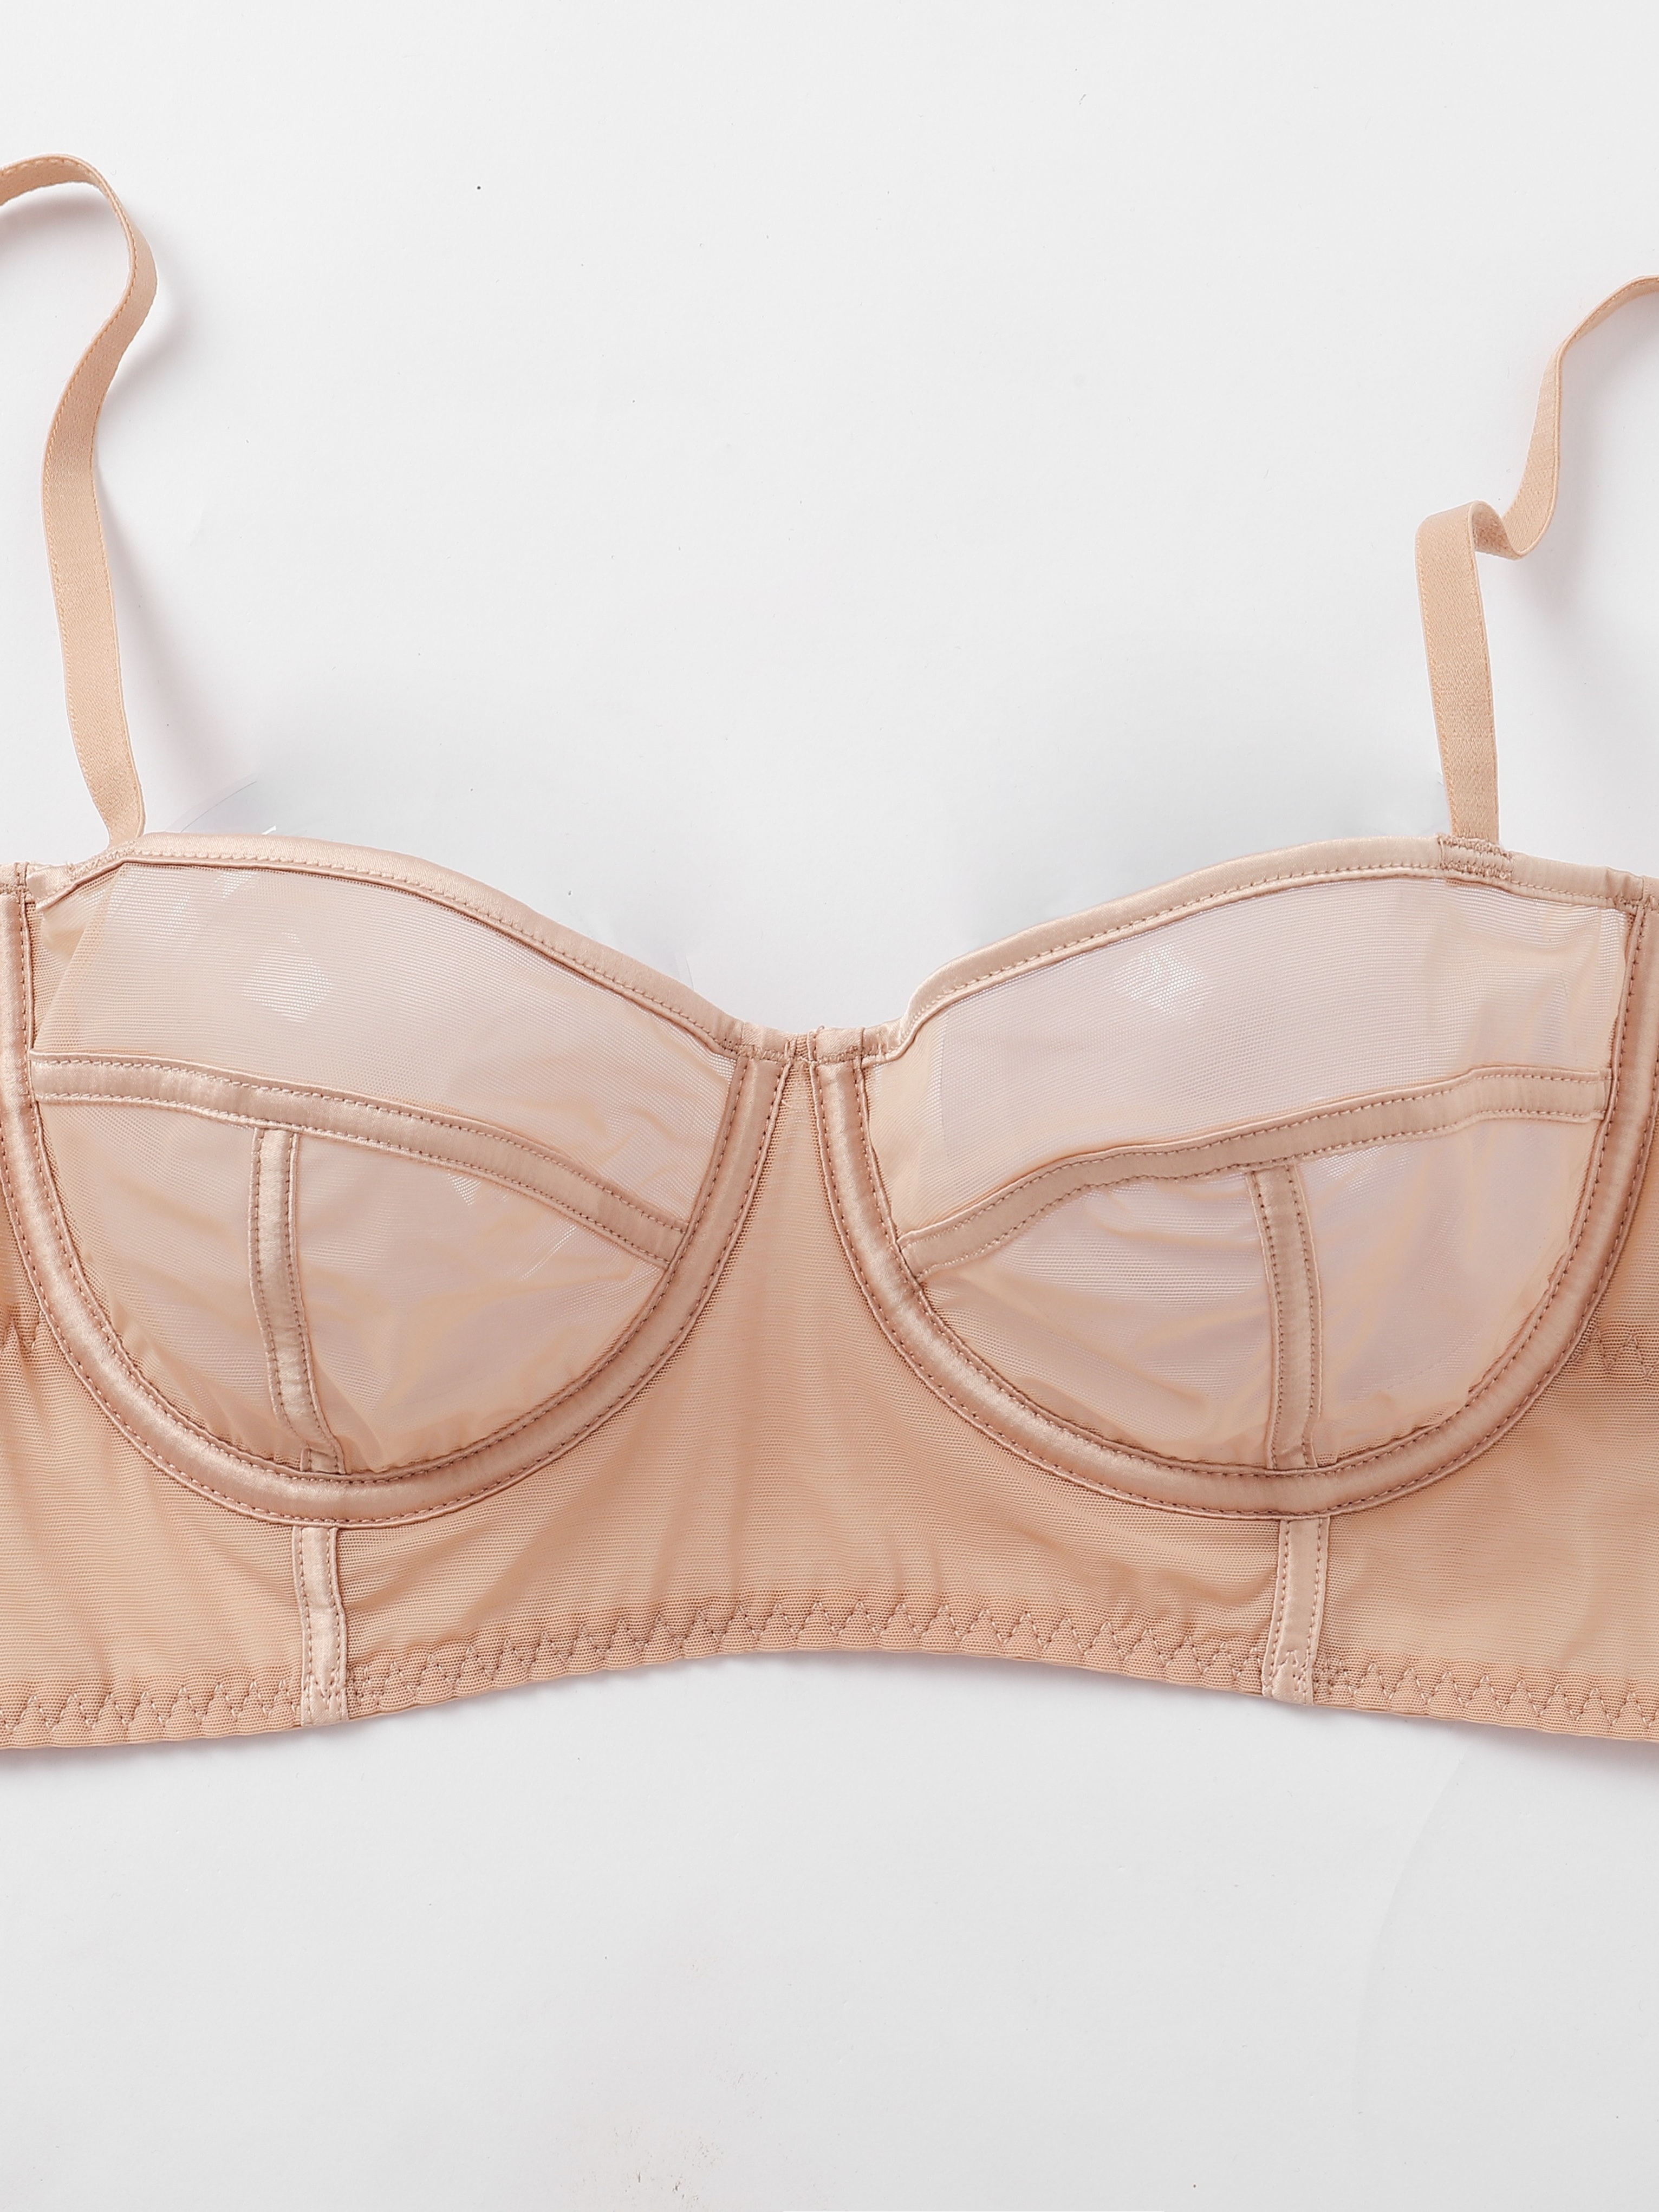  Other Stories lingerie in beige